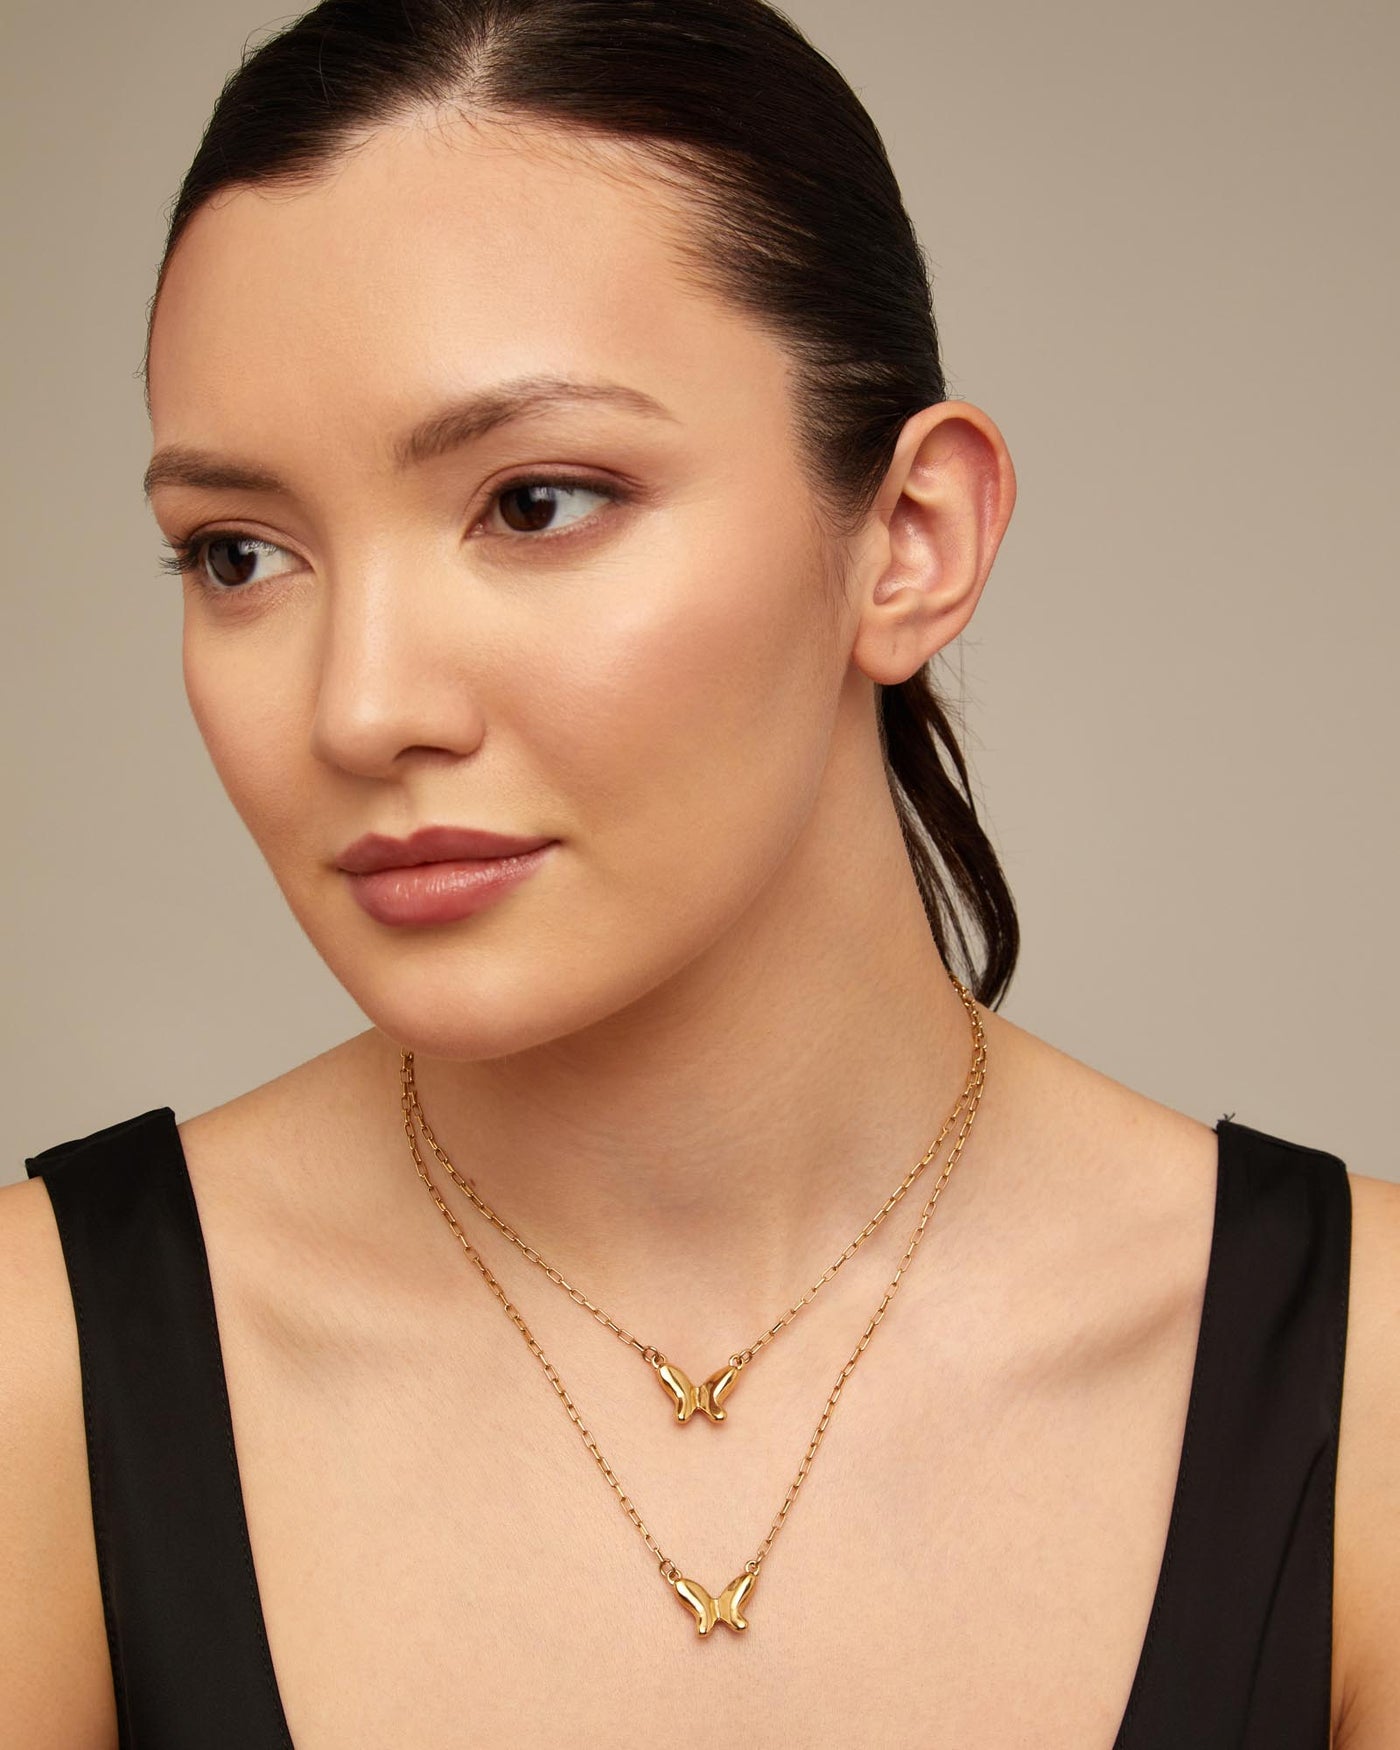 Doublefly Necklace, Gold